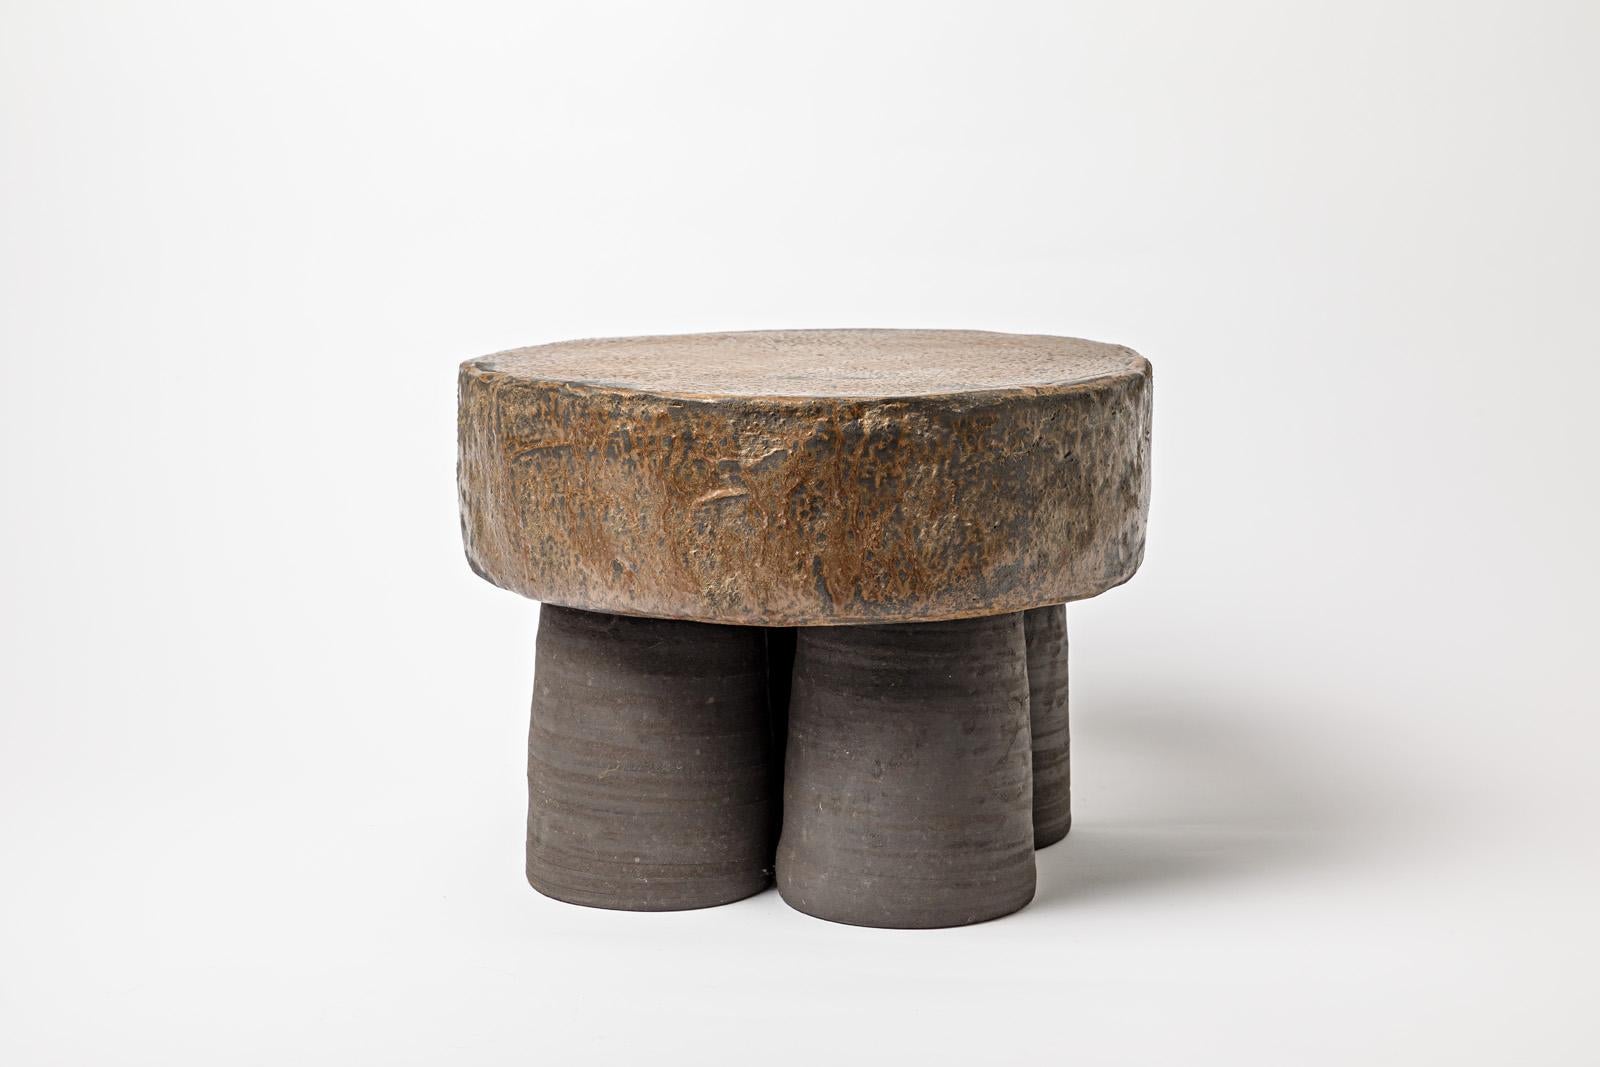 French Brown Glazed Ceramic Stool or Coffee Table by Mia Jensen, 2023